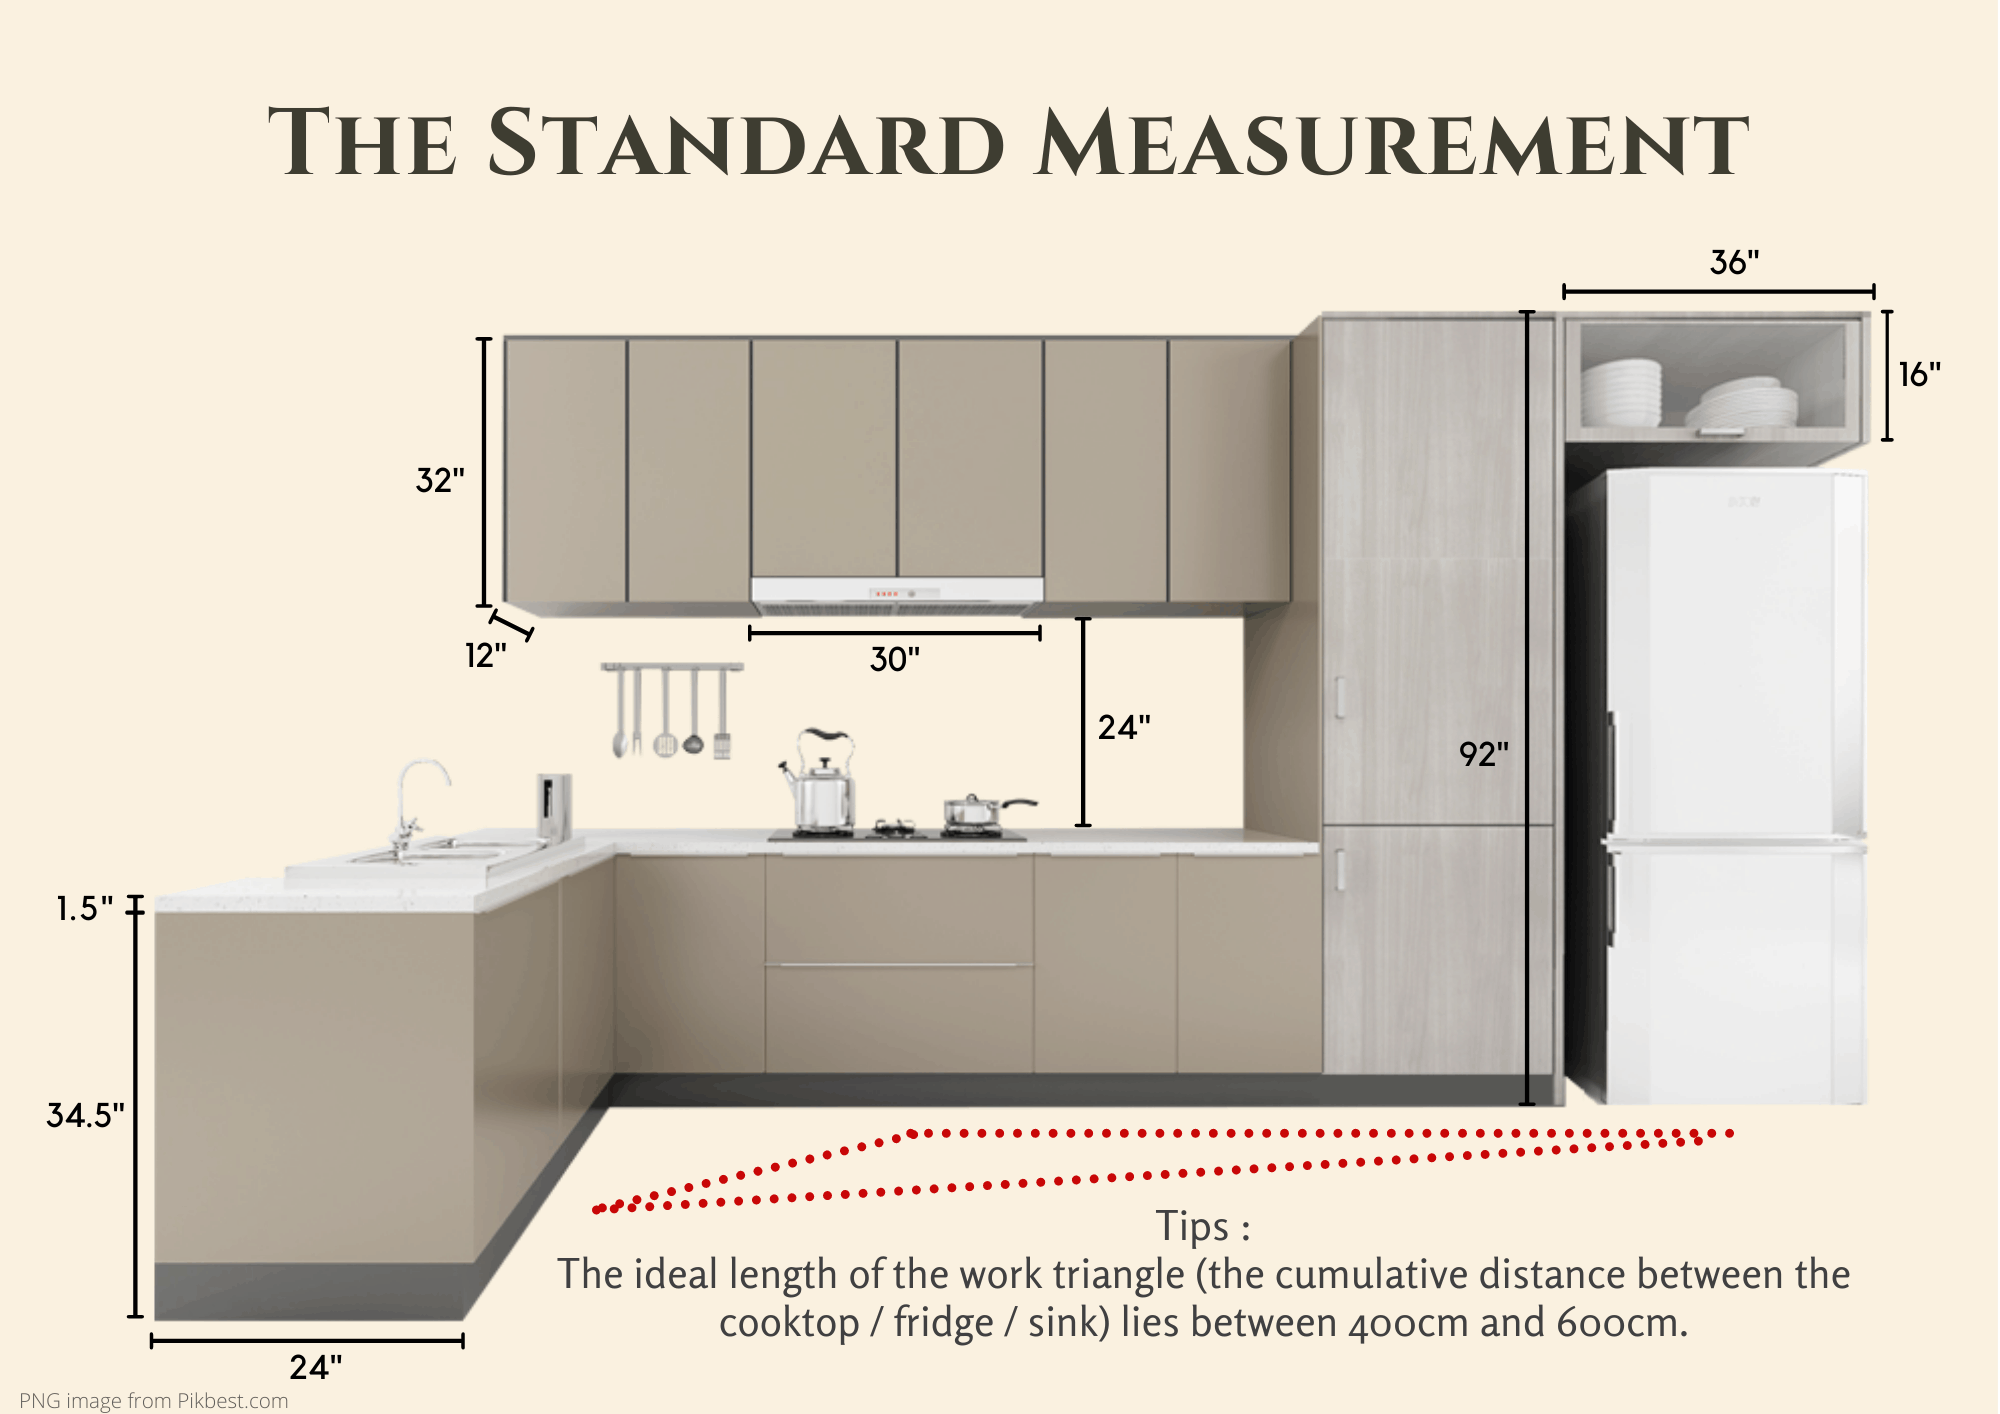 THE BASIC GUIDE FOR KITCHEN MEASUREMENTS AND DESIGN - MAR. 2021 , ISSUE 07